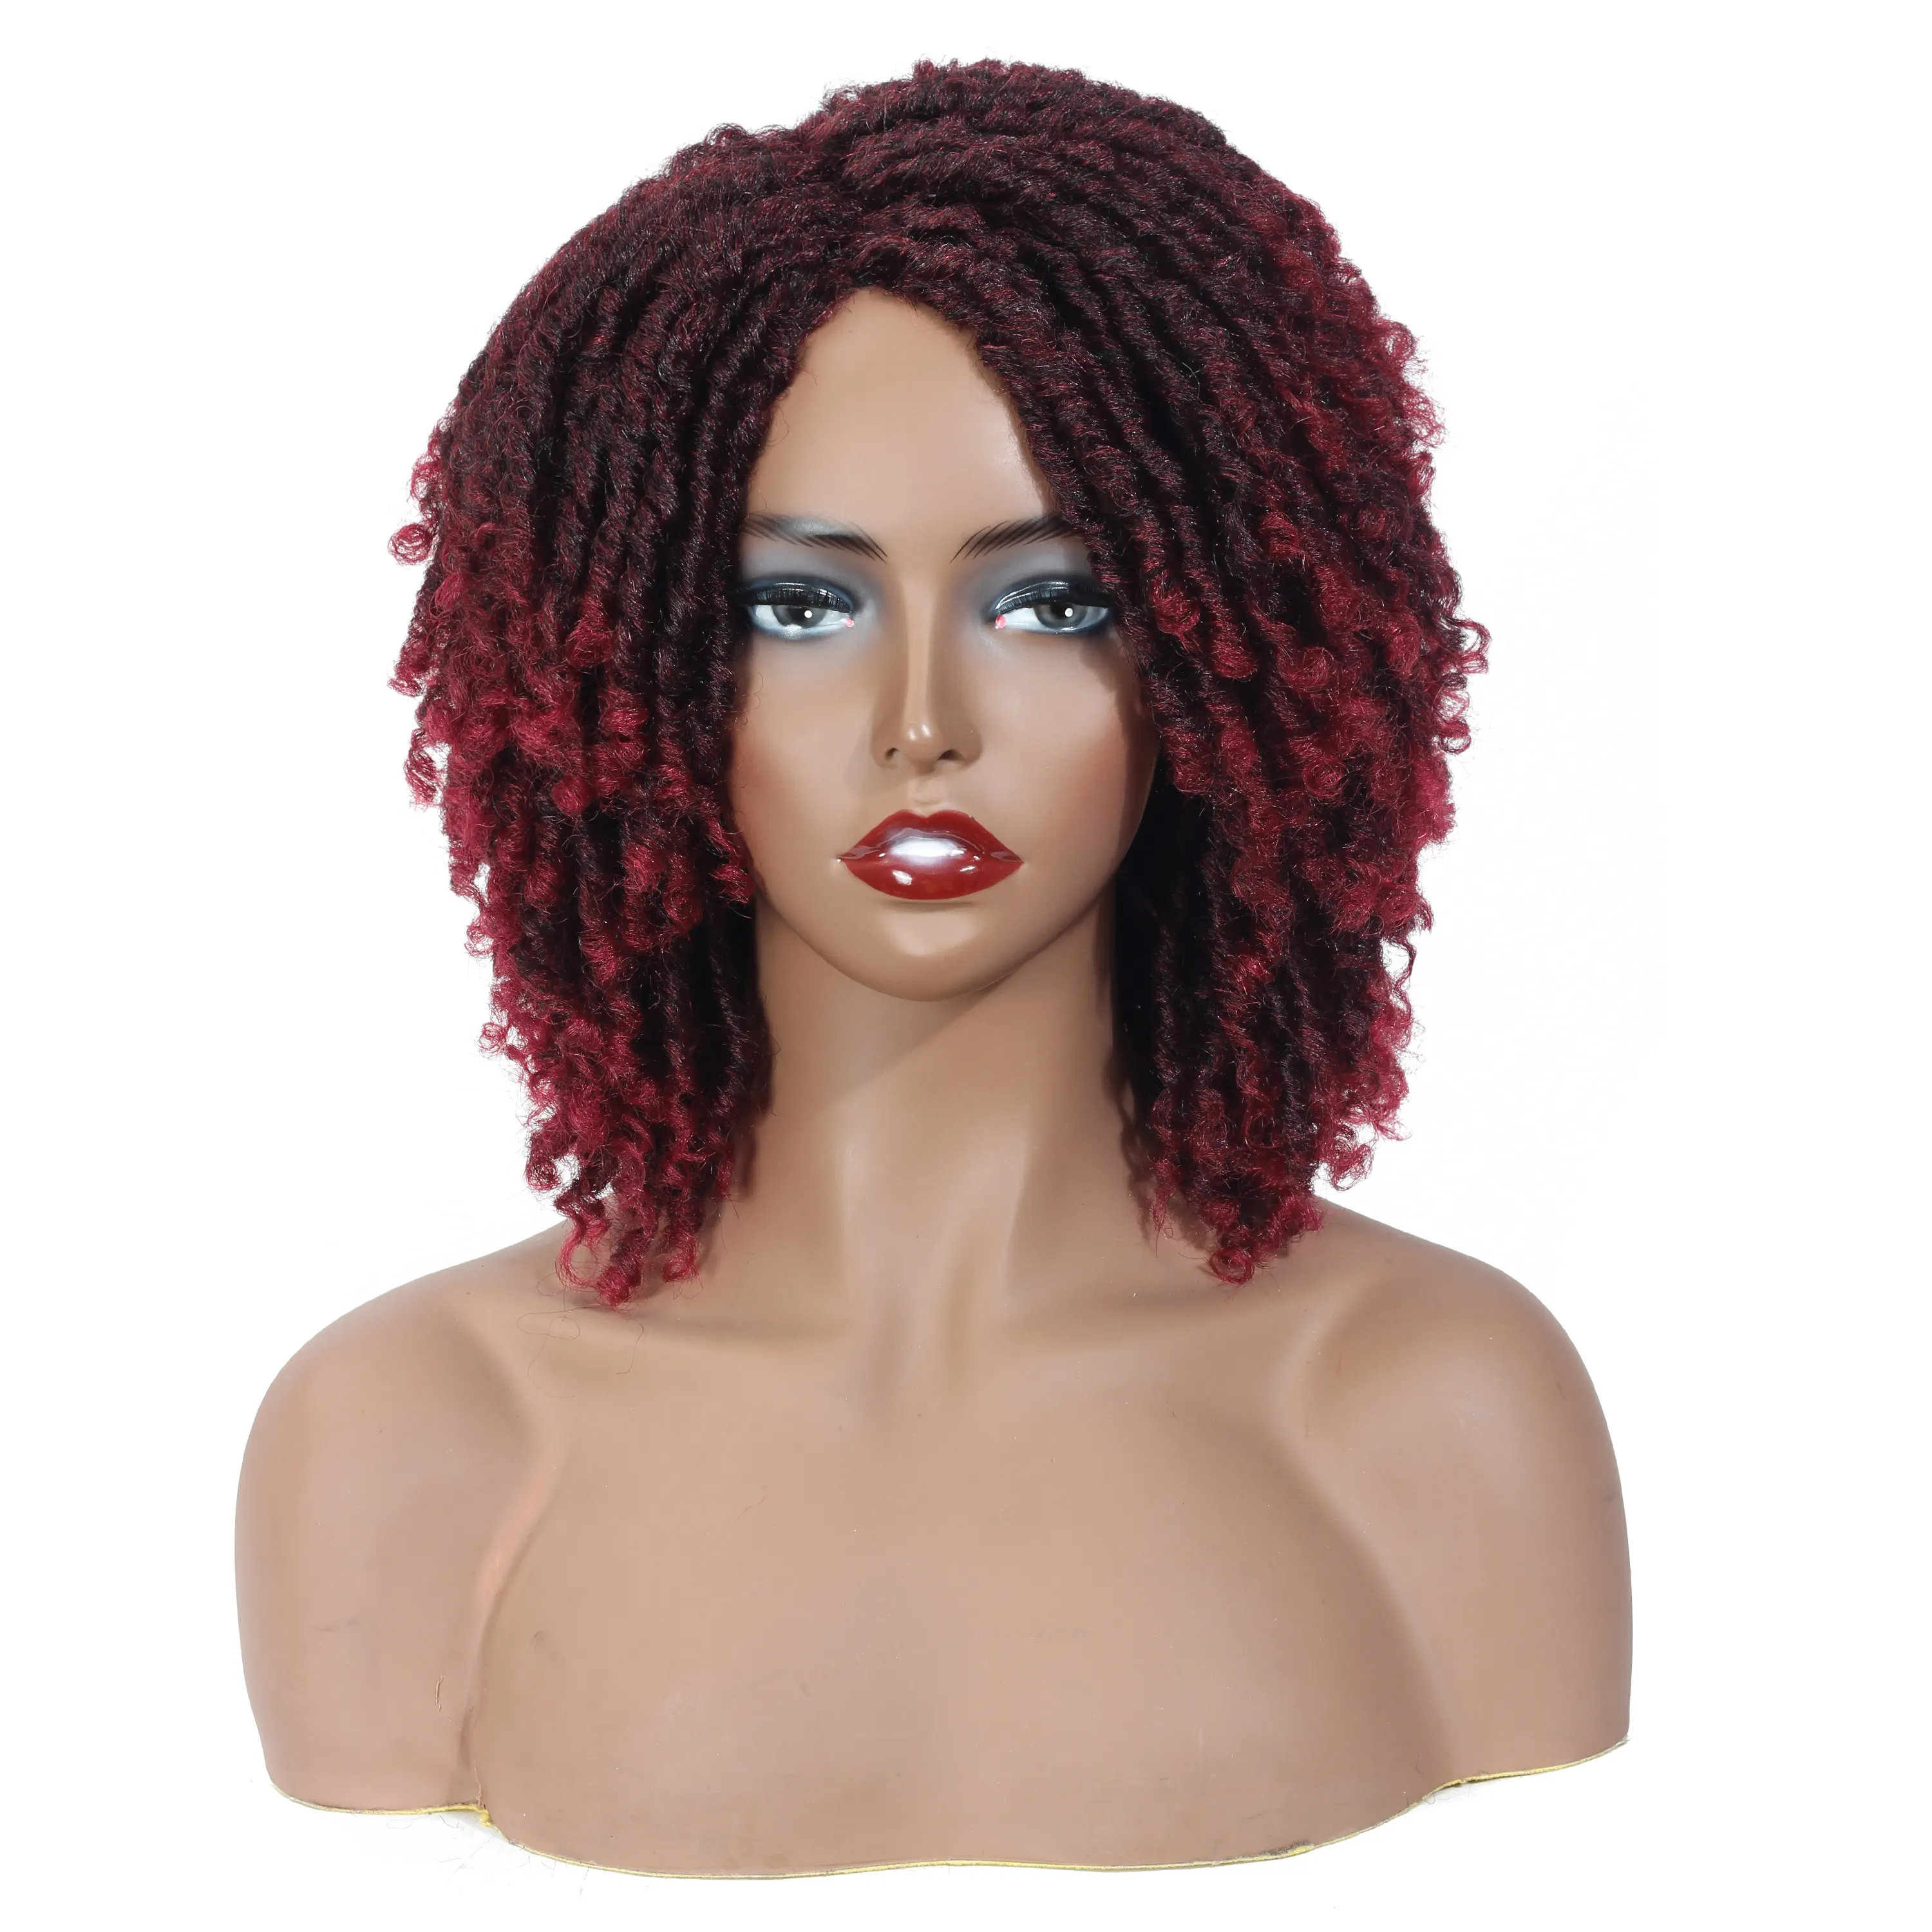 Free Sample African Style Crochet Hair Wig Dreadlocks Faux Locs Braided Wig with Synthetic Hair for Black Women